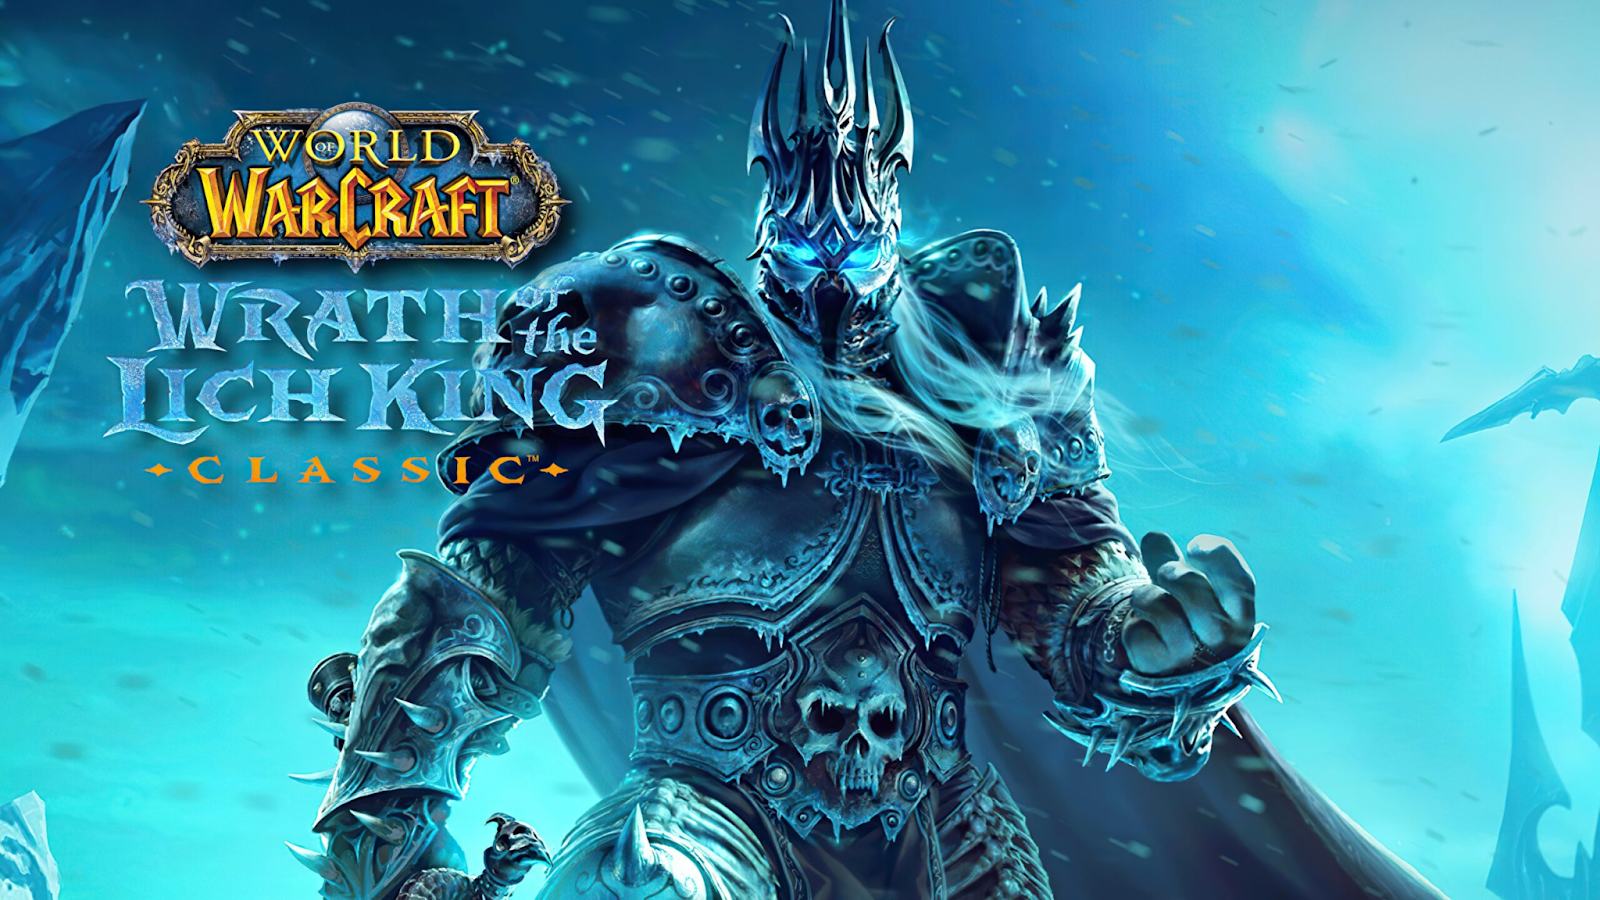 World of Warcraft: The Wrath of the Lich King Poster